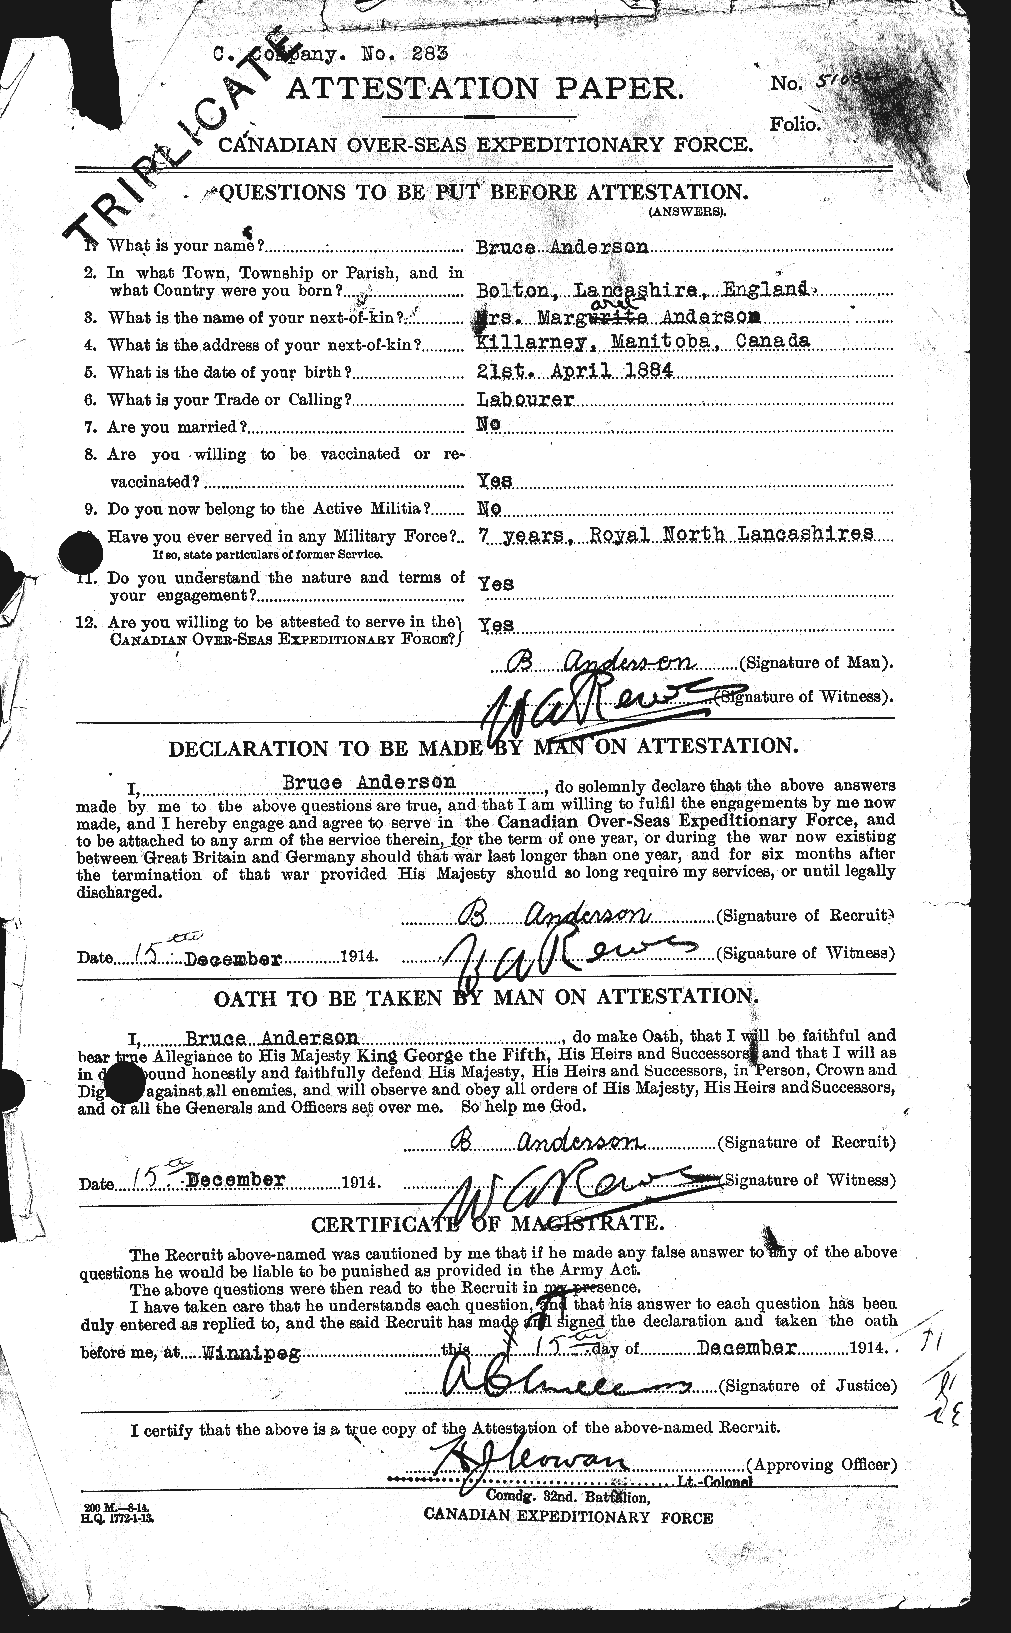 Personnel Records of the First World War - CEF 209306a